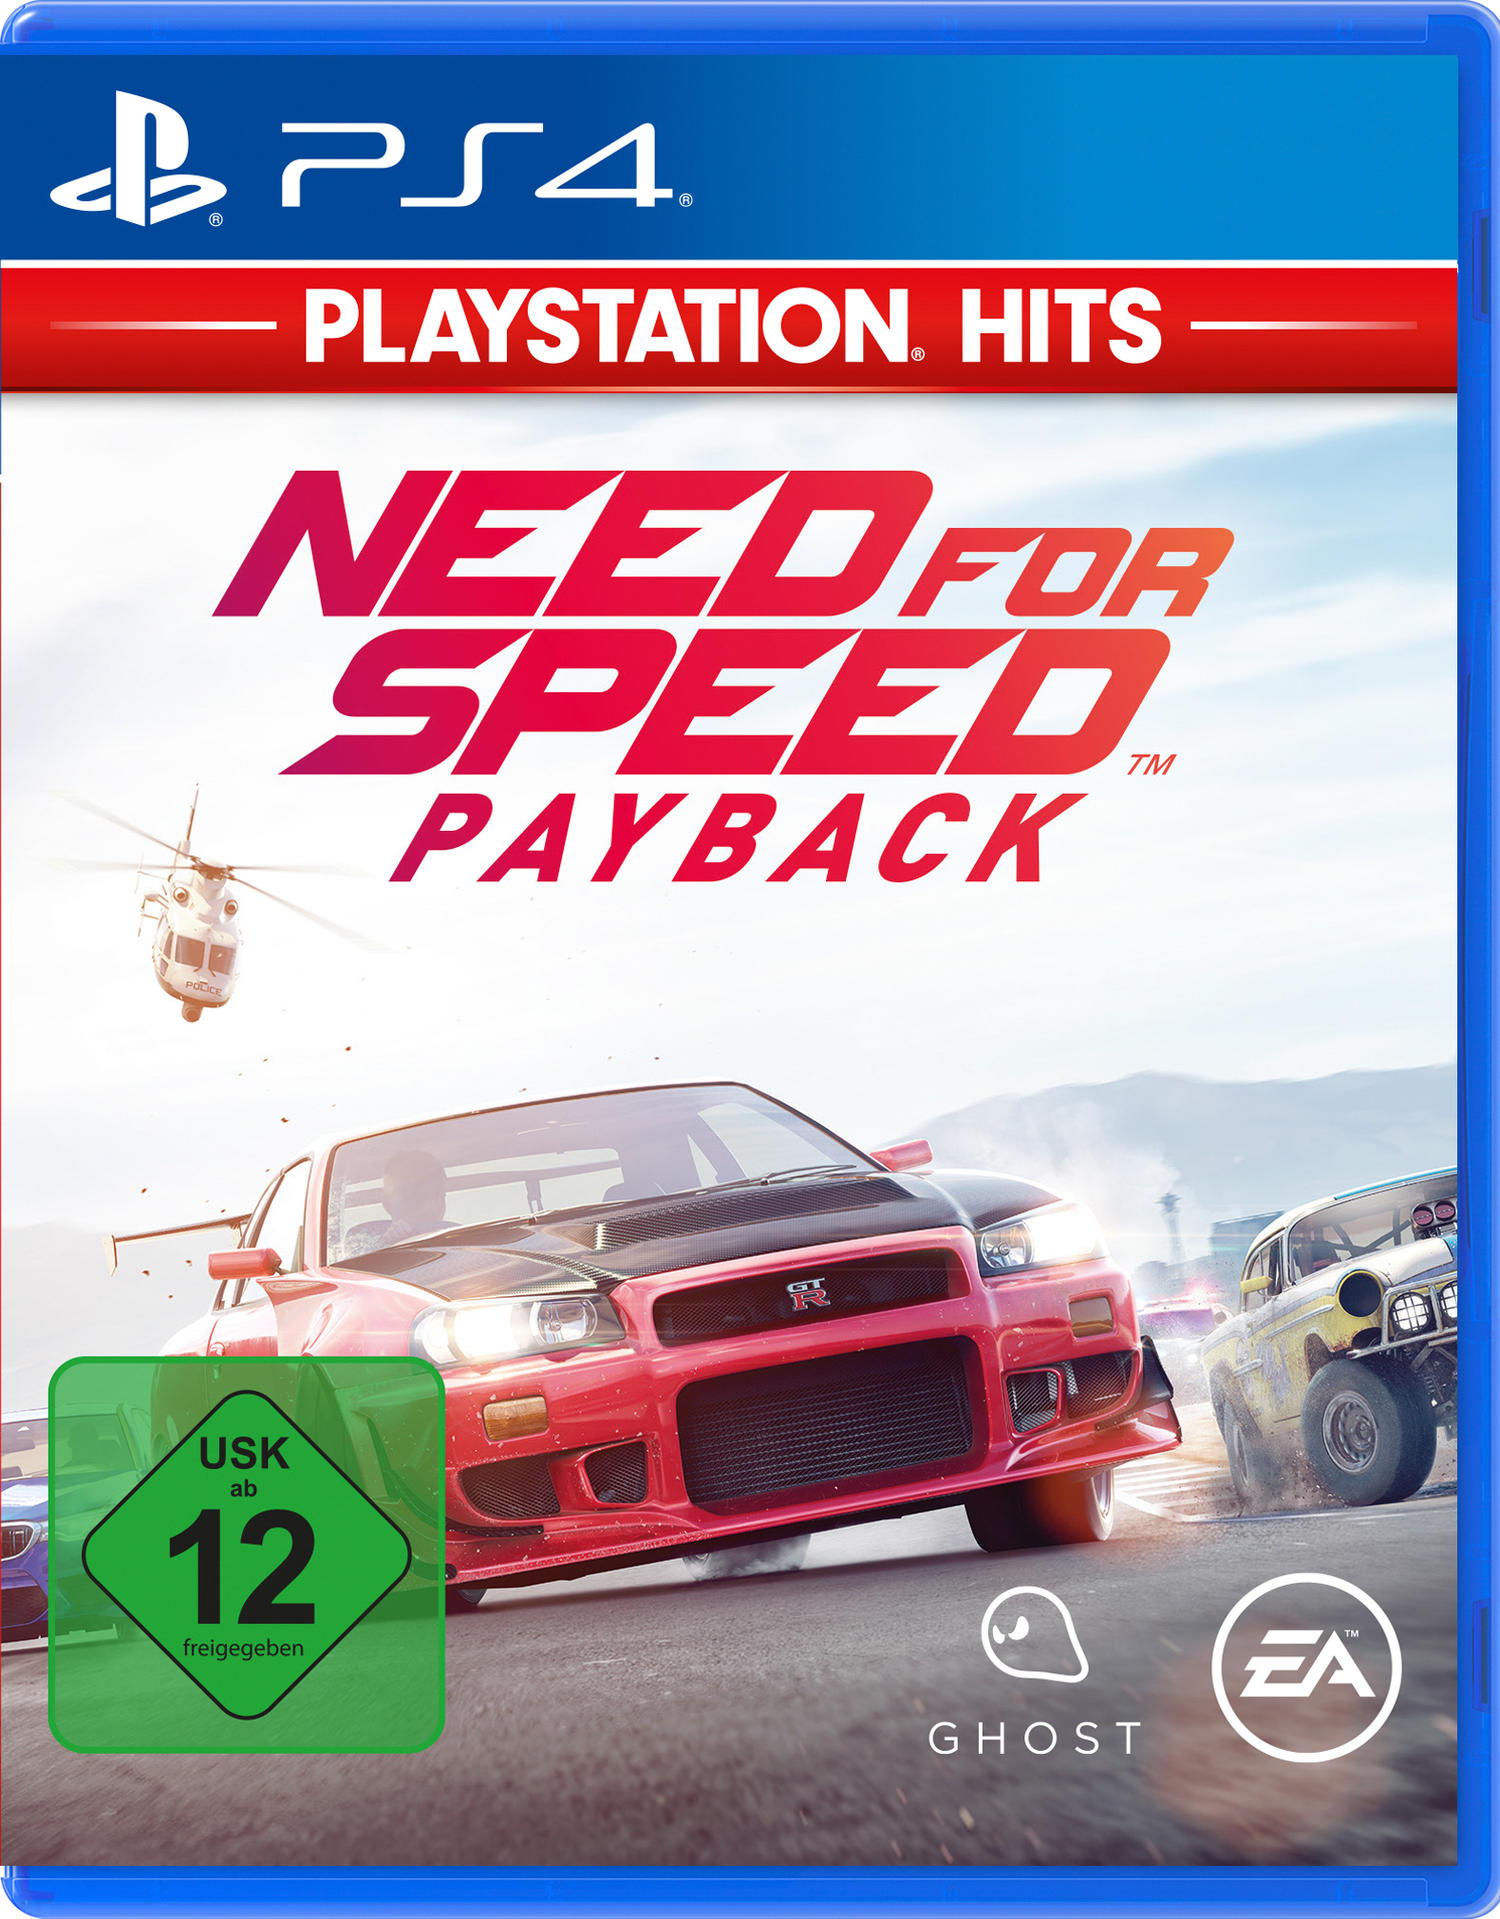 - Payback PlayStation 4] Hits: Need for [PlayStation Speed